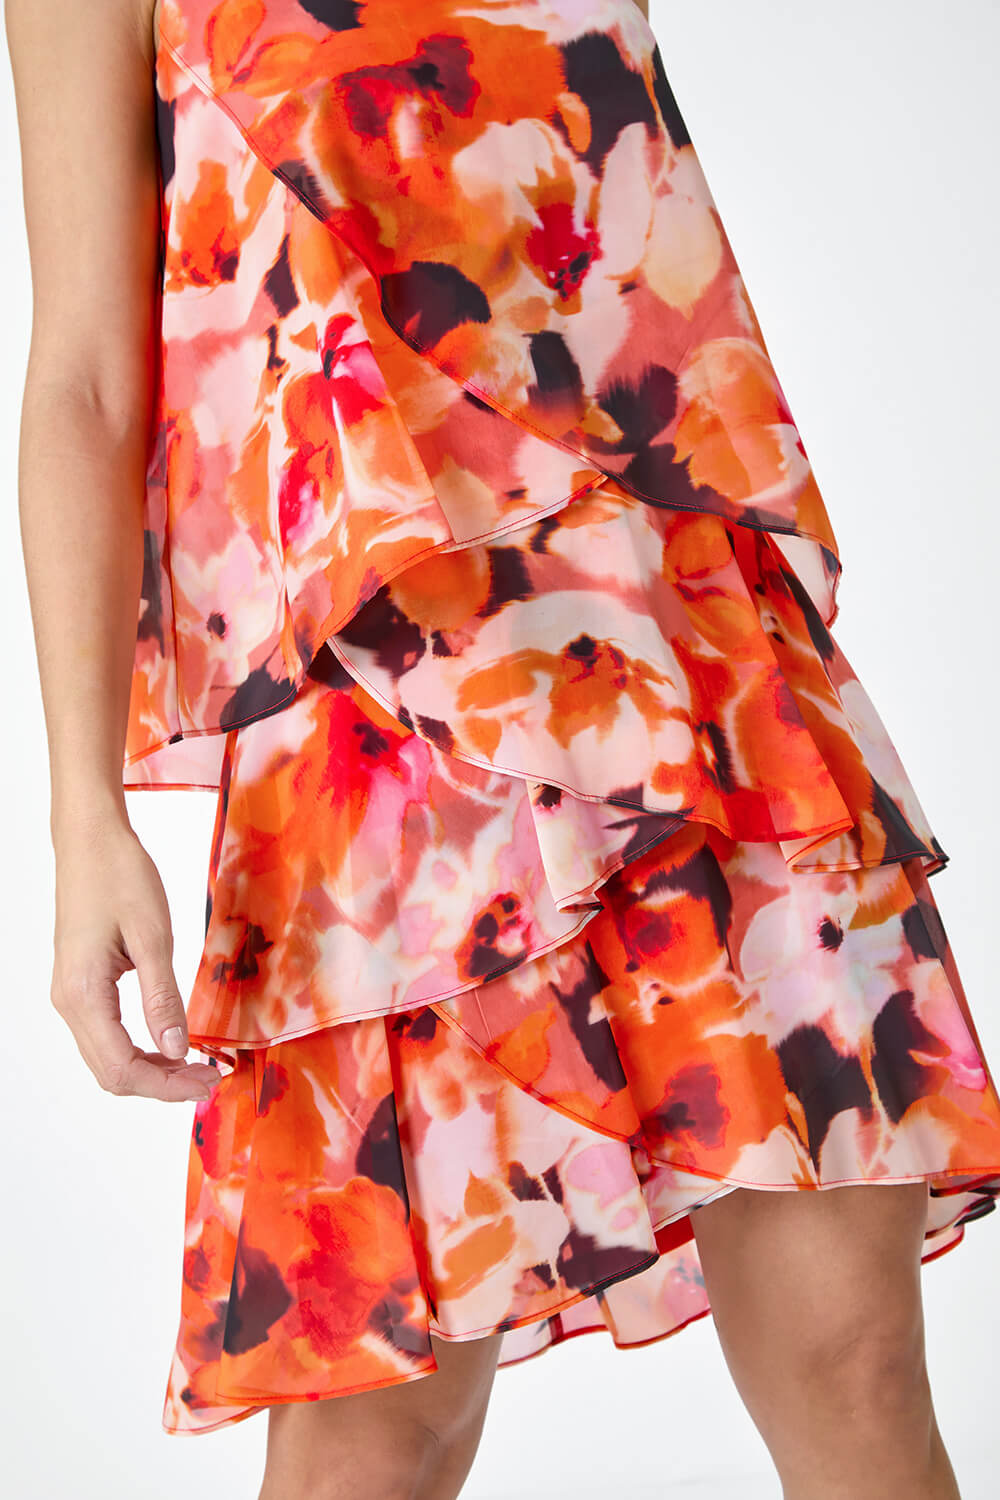 ORANGE Floral Print Tiered Layer Dress, Image 5 of 5